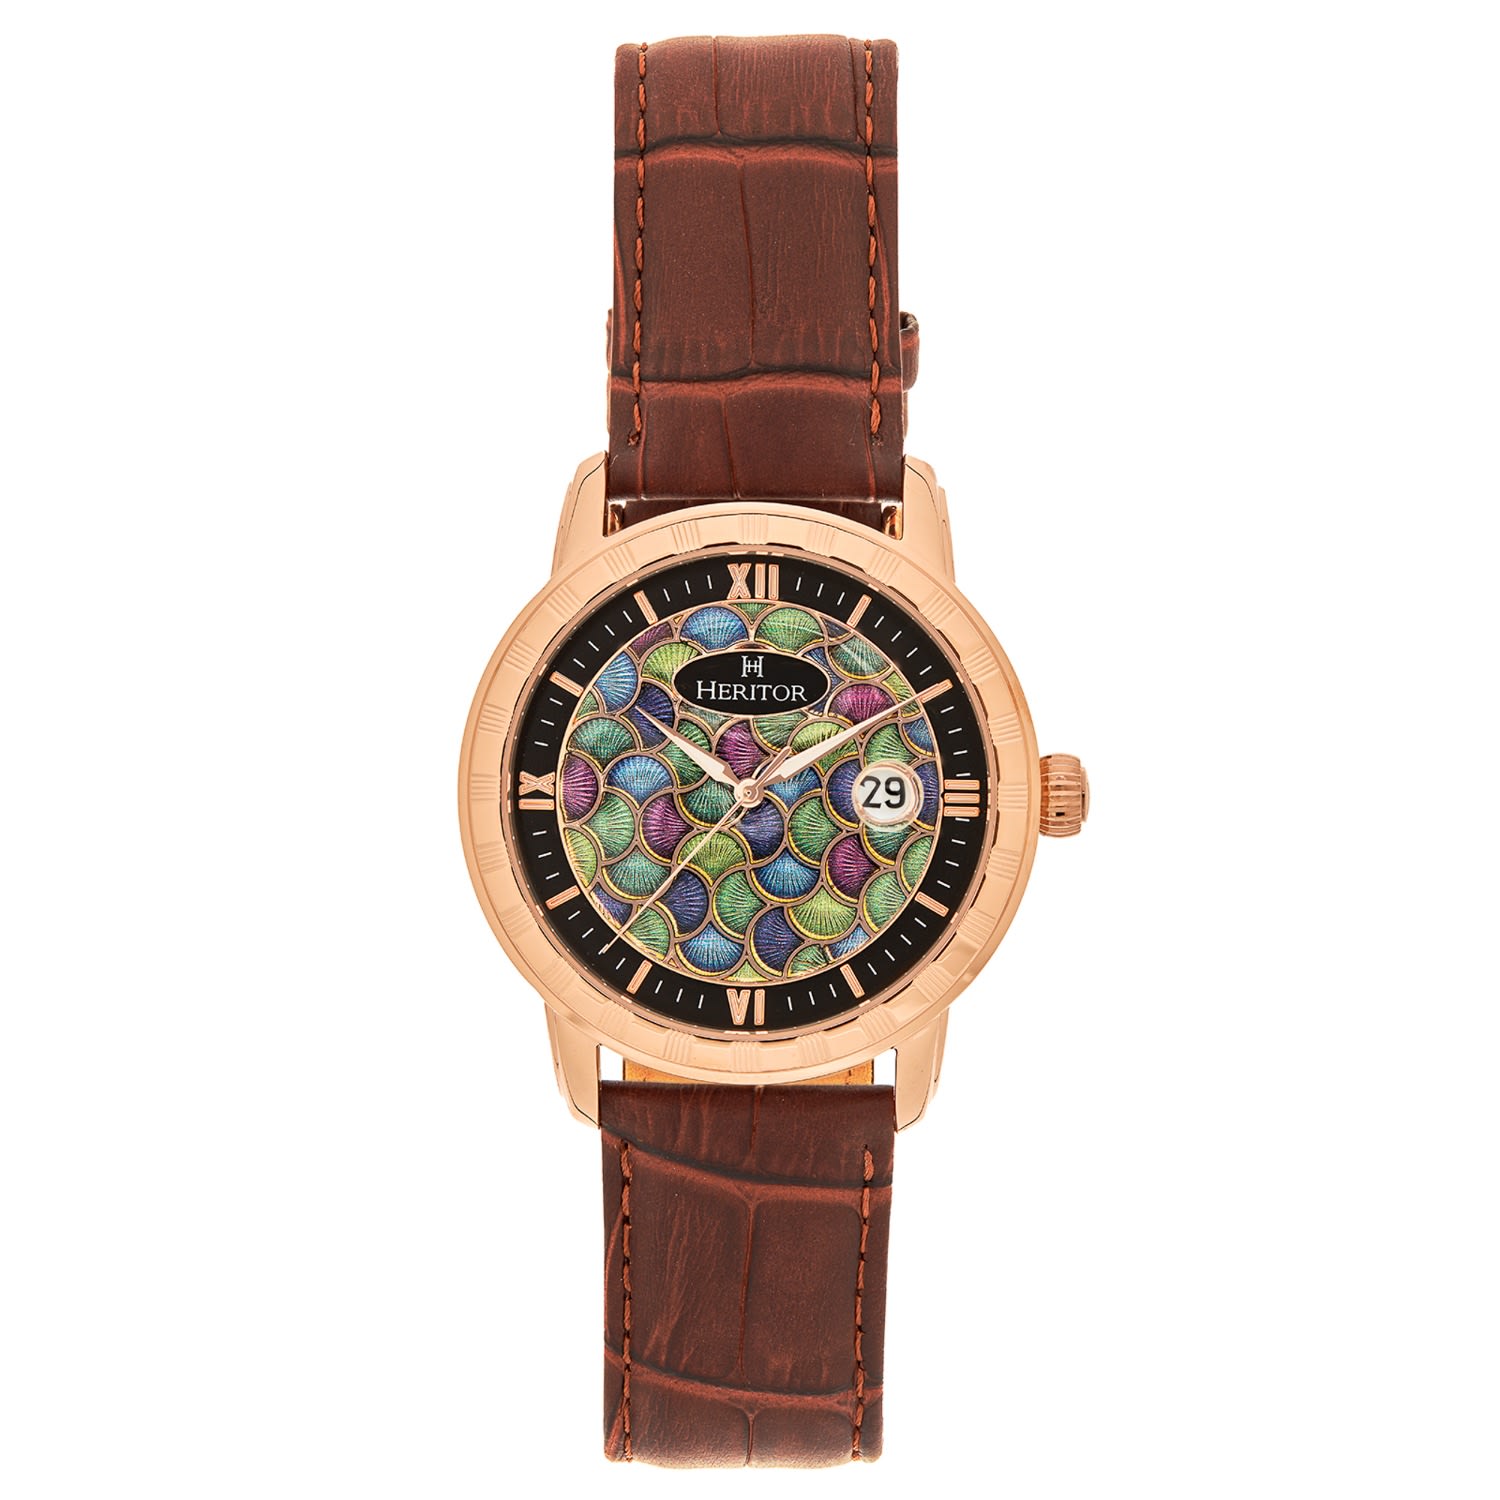 Men’s Brown / Rose Gold Protégé Leather-Band Watch With Date - Brown, Rose Gold Heritor Automatic